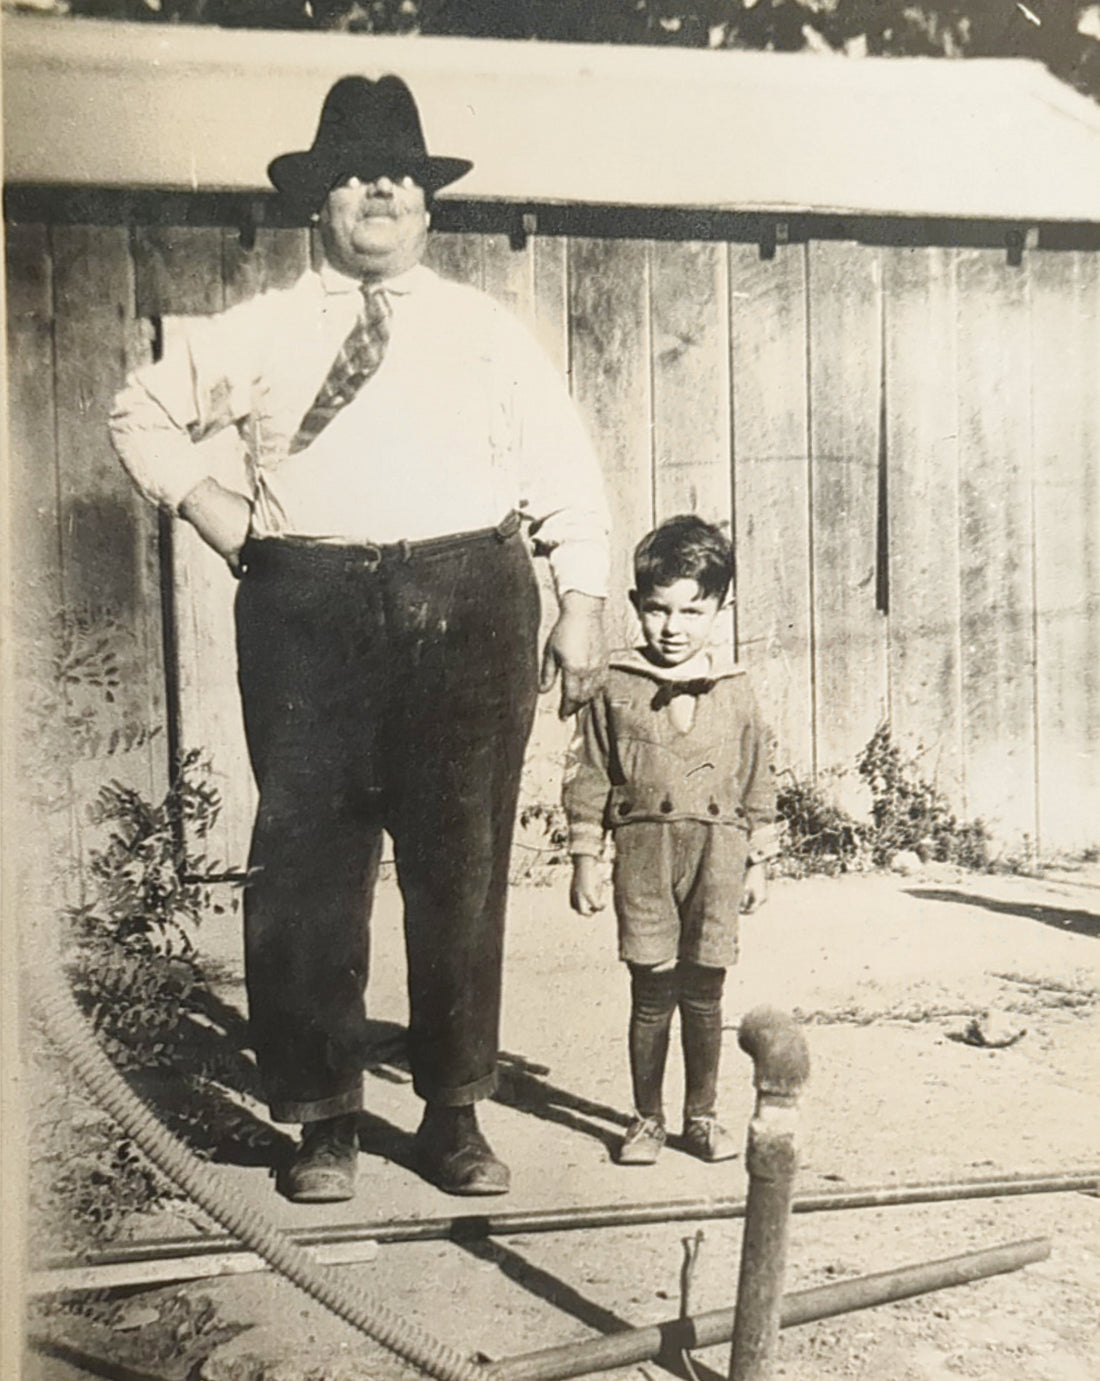 L.A. Lepiane, Italian immigrant holding hands with his son in Hollister, CA circa 1900